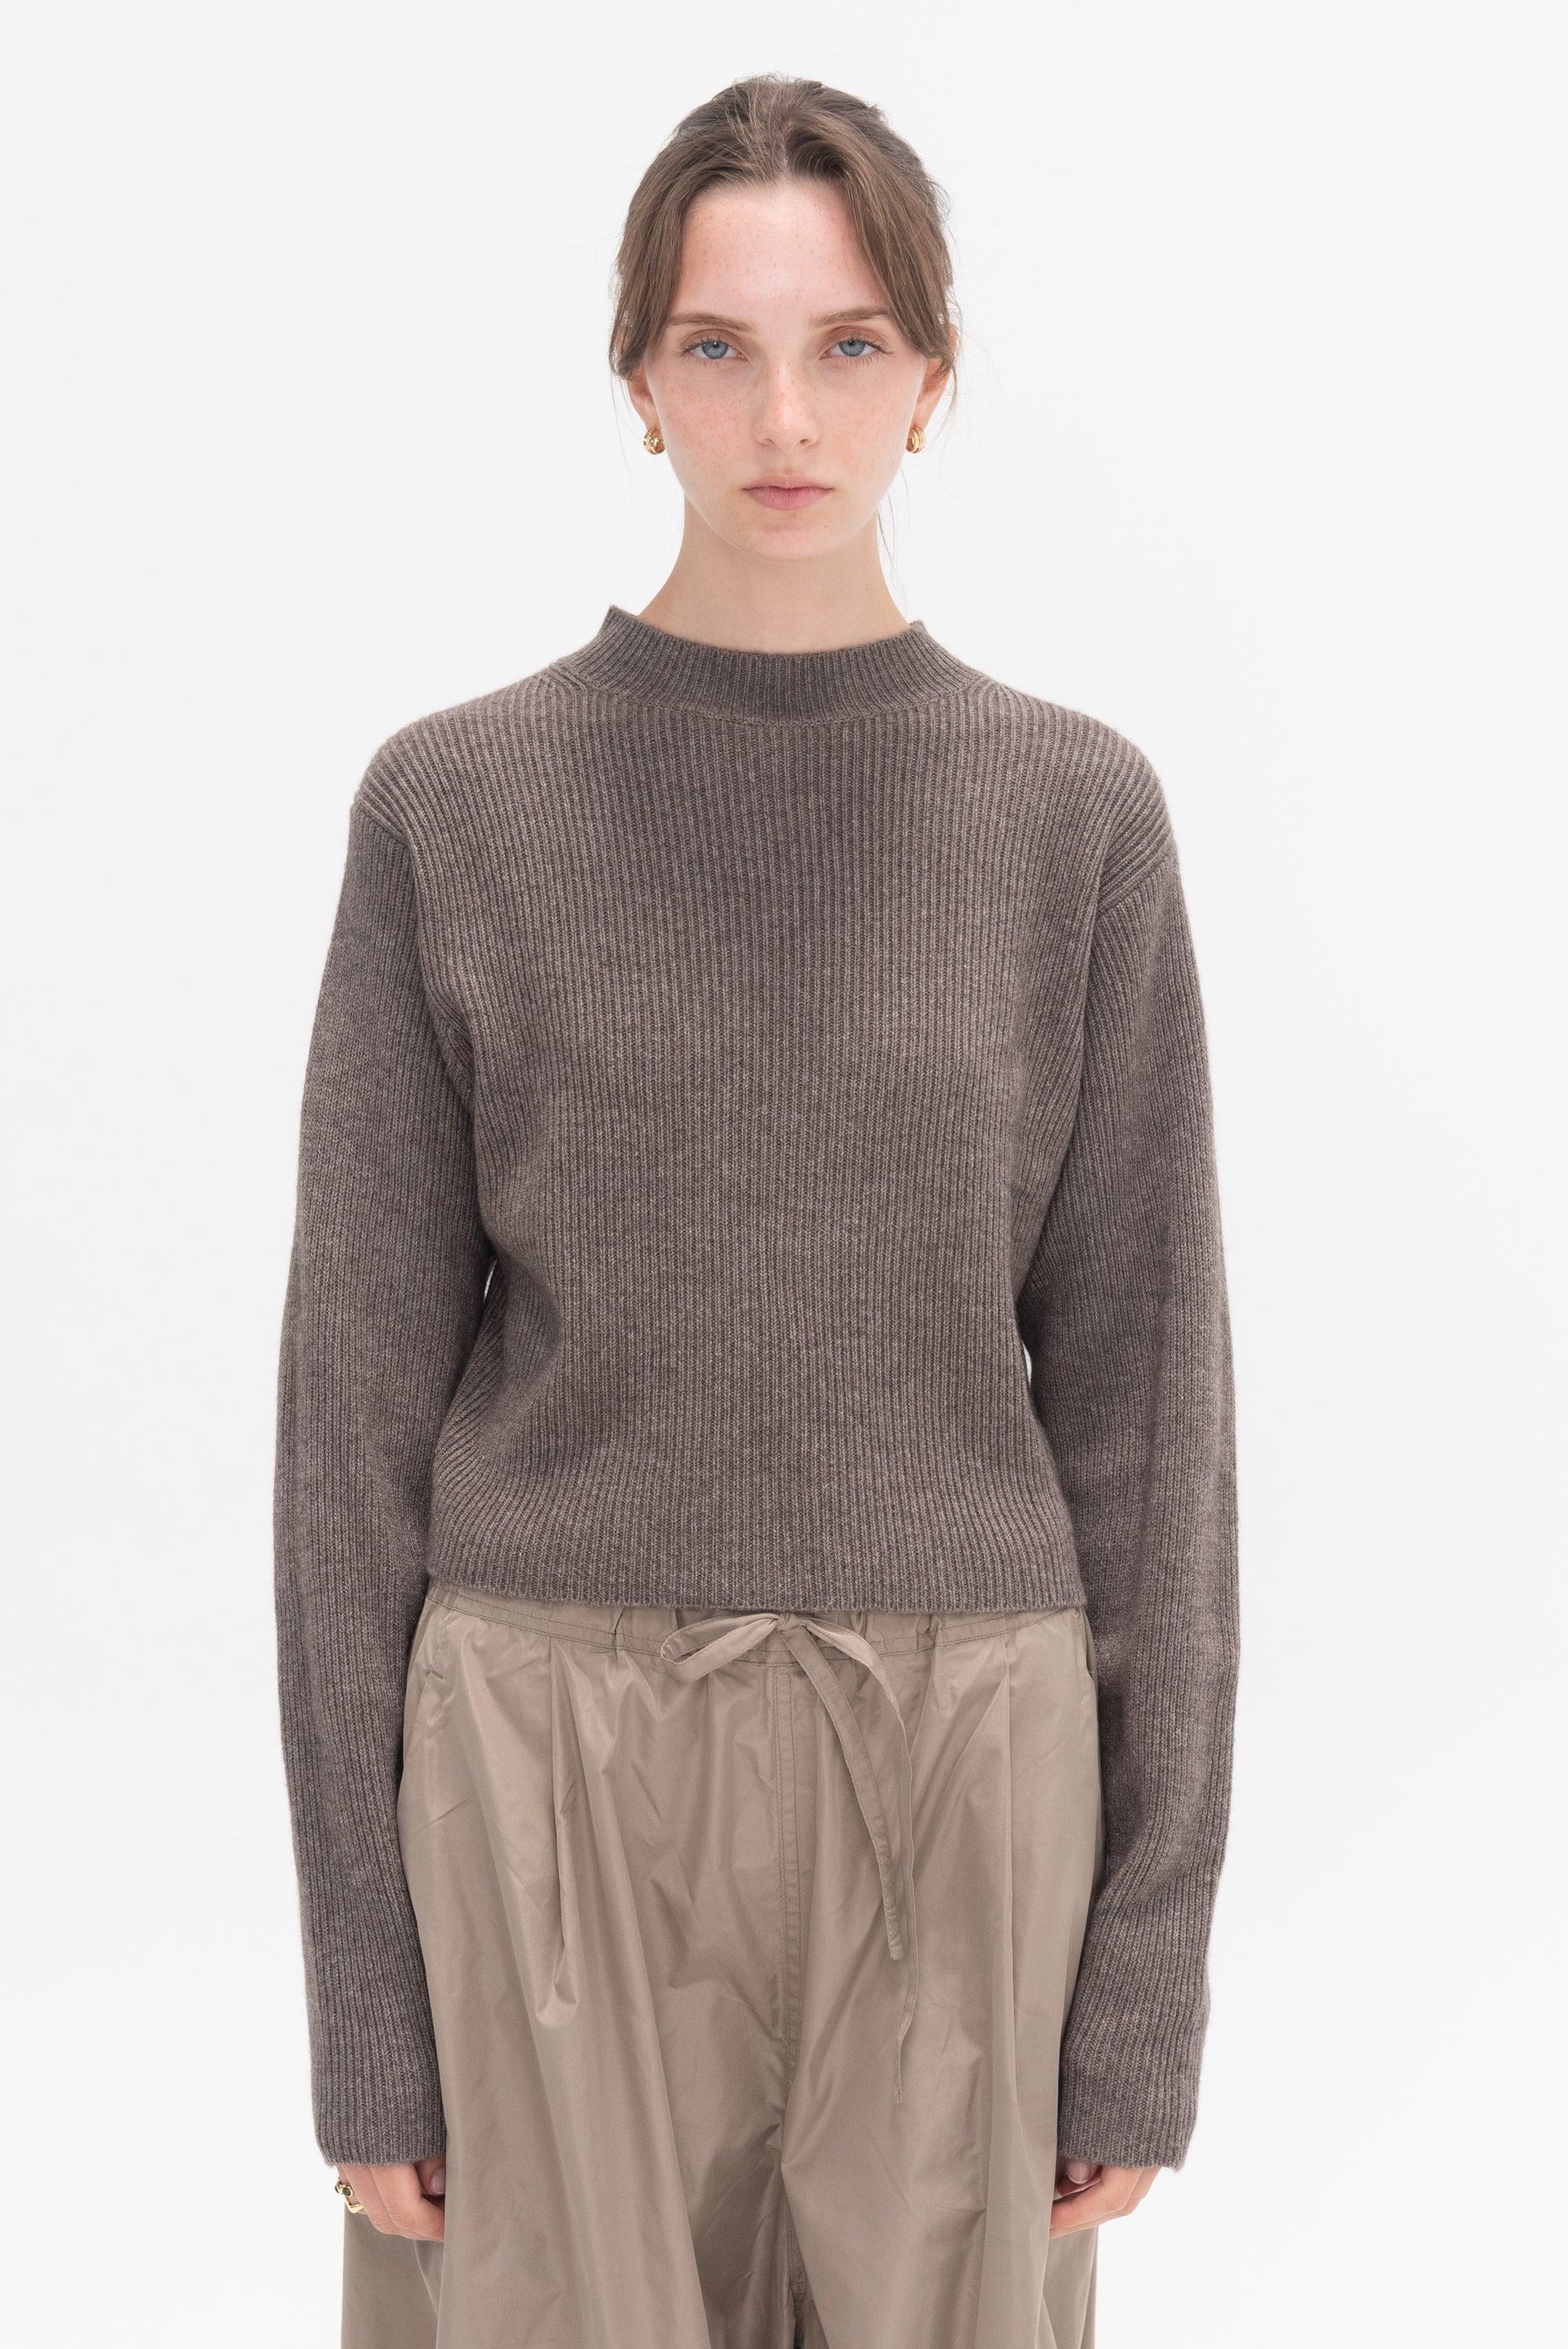 SOFIE D'HOORE - Montana Ribbed Sweater, Taupe Melange